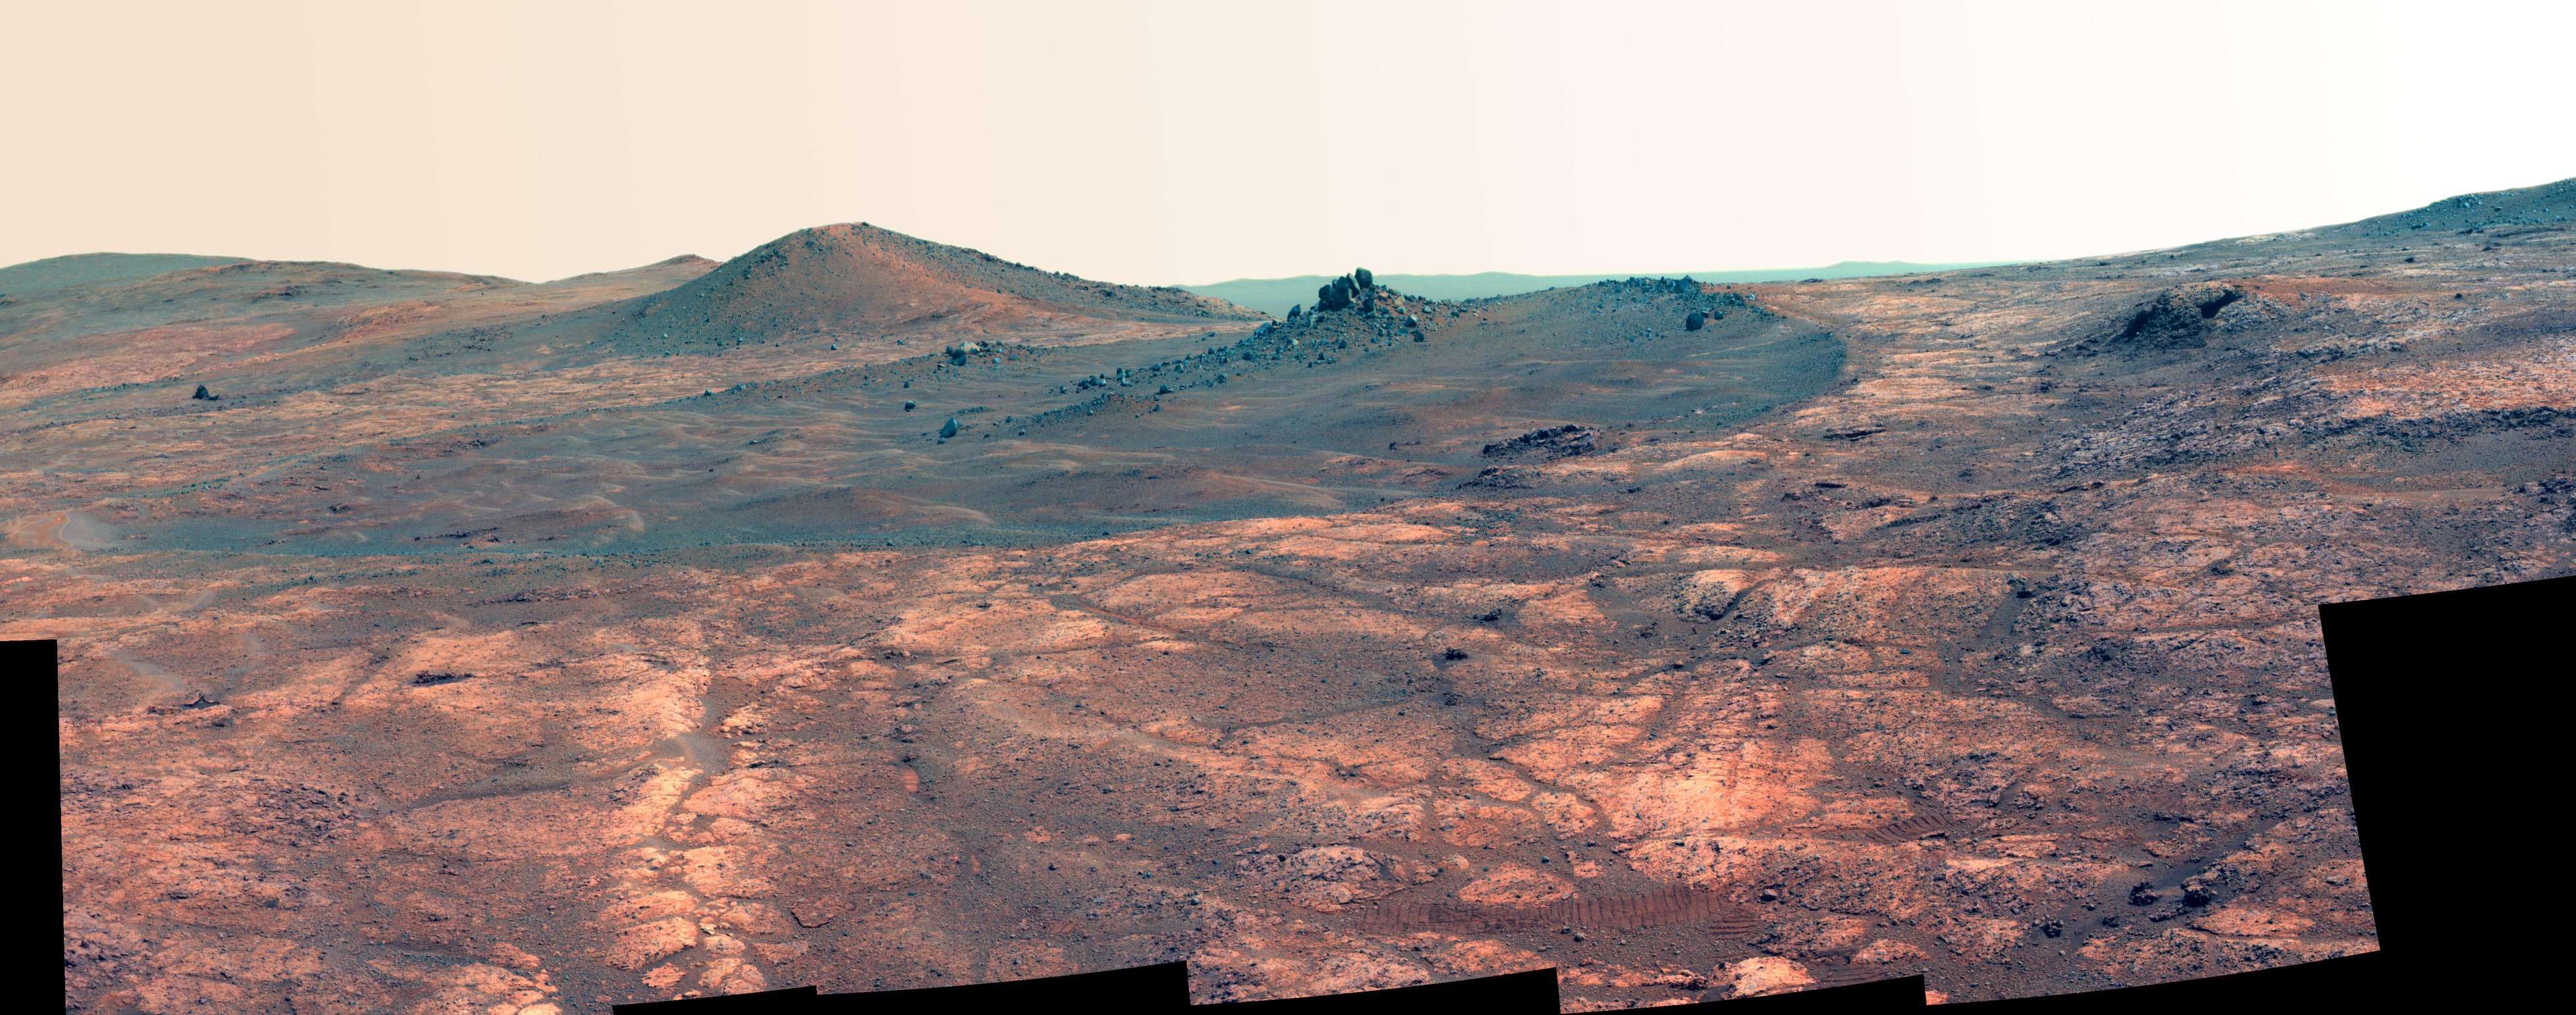 An elongated crater called "Spirit of St. Louis," with a rock spire in it, dominates this scene from the panoramic camera (Pancam) on NASA's Mars Exploration Rover Opportunity.